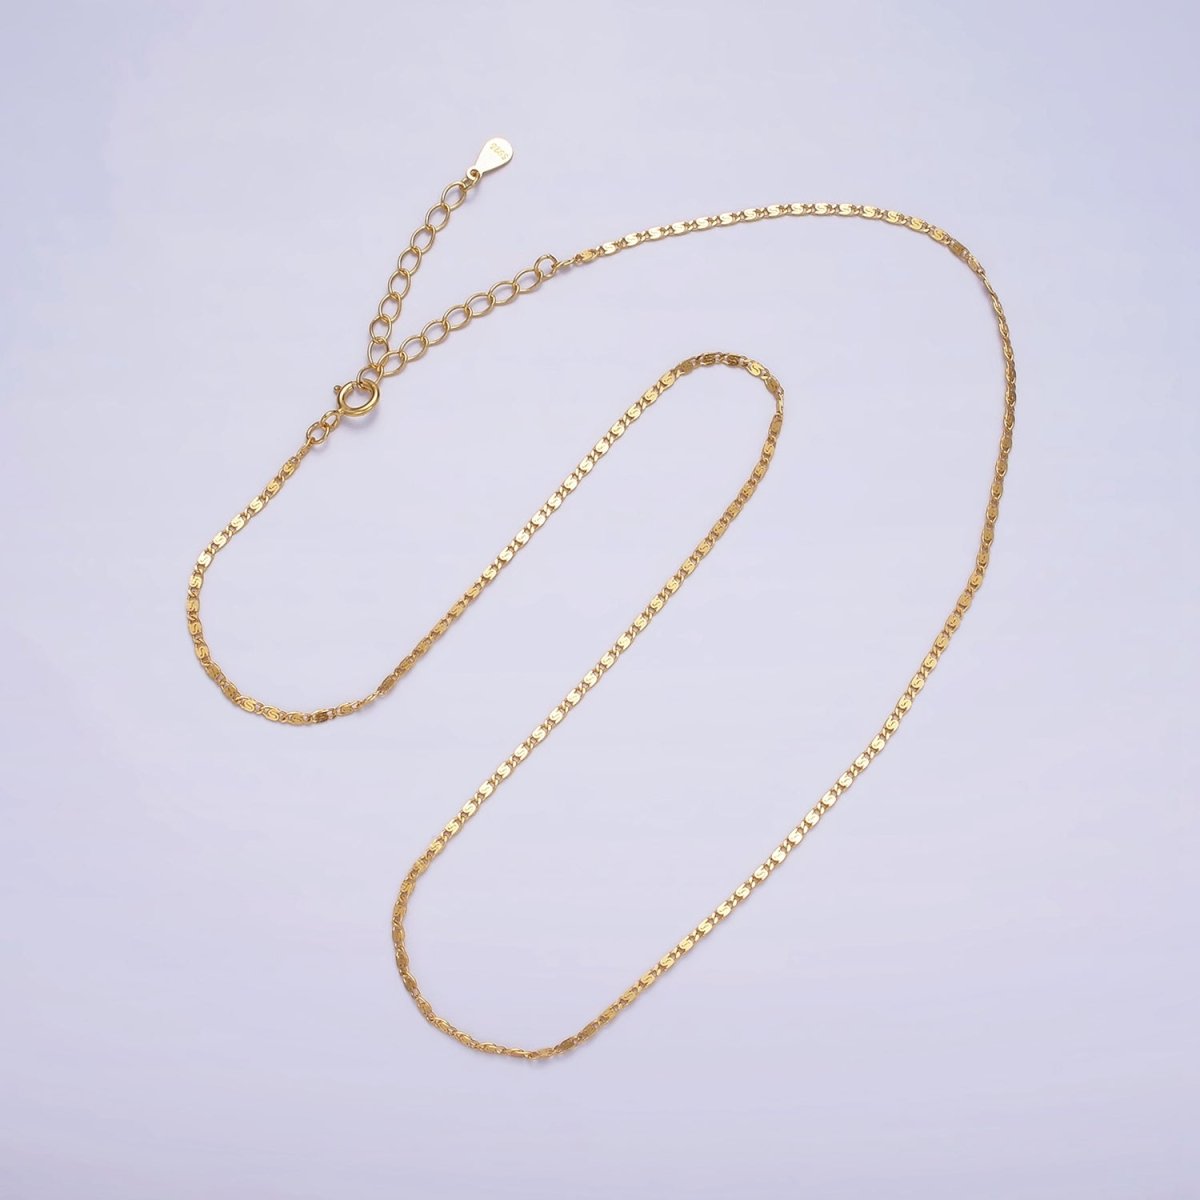 24K Gold Vermeil S925 Sterling Silver 1.2mm Dainty Scroll 15.5 Inch Chain Necklace | WA-1984 Clearance Pricing - DLUXCA